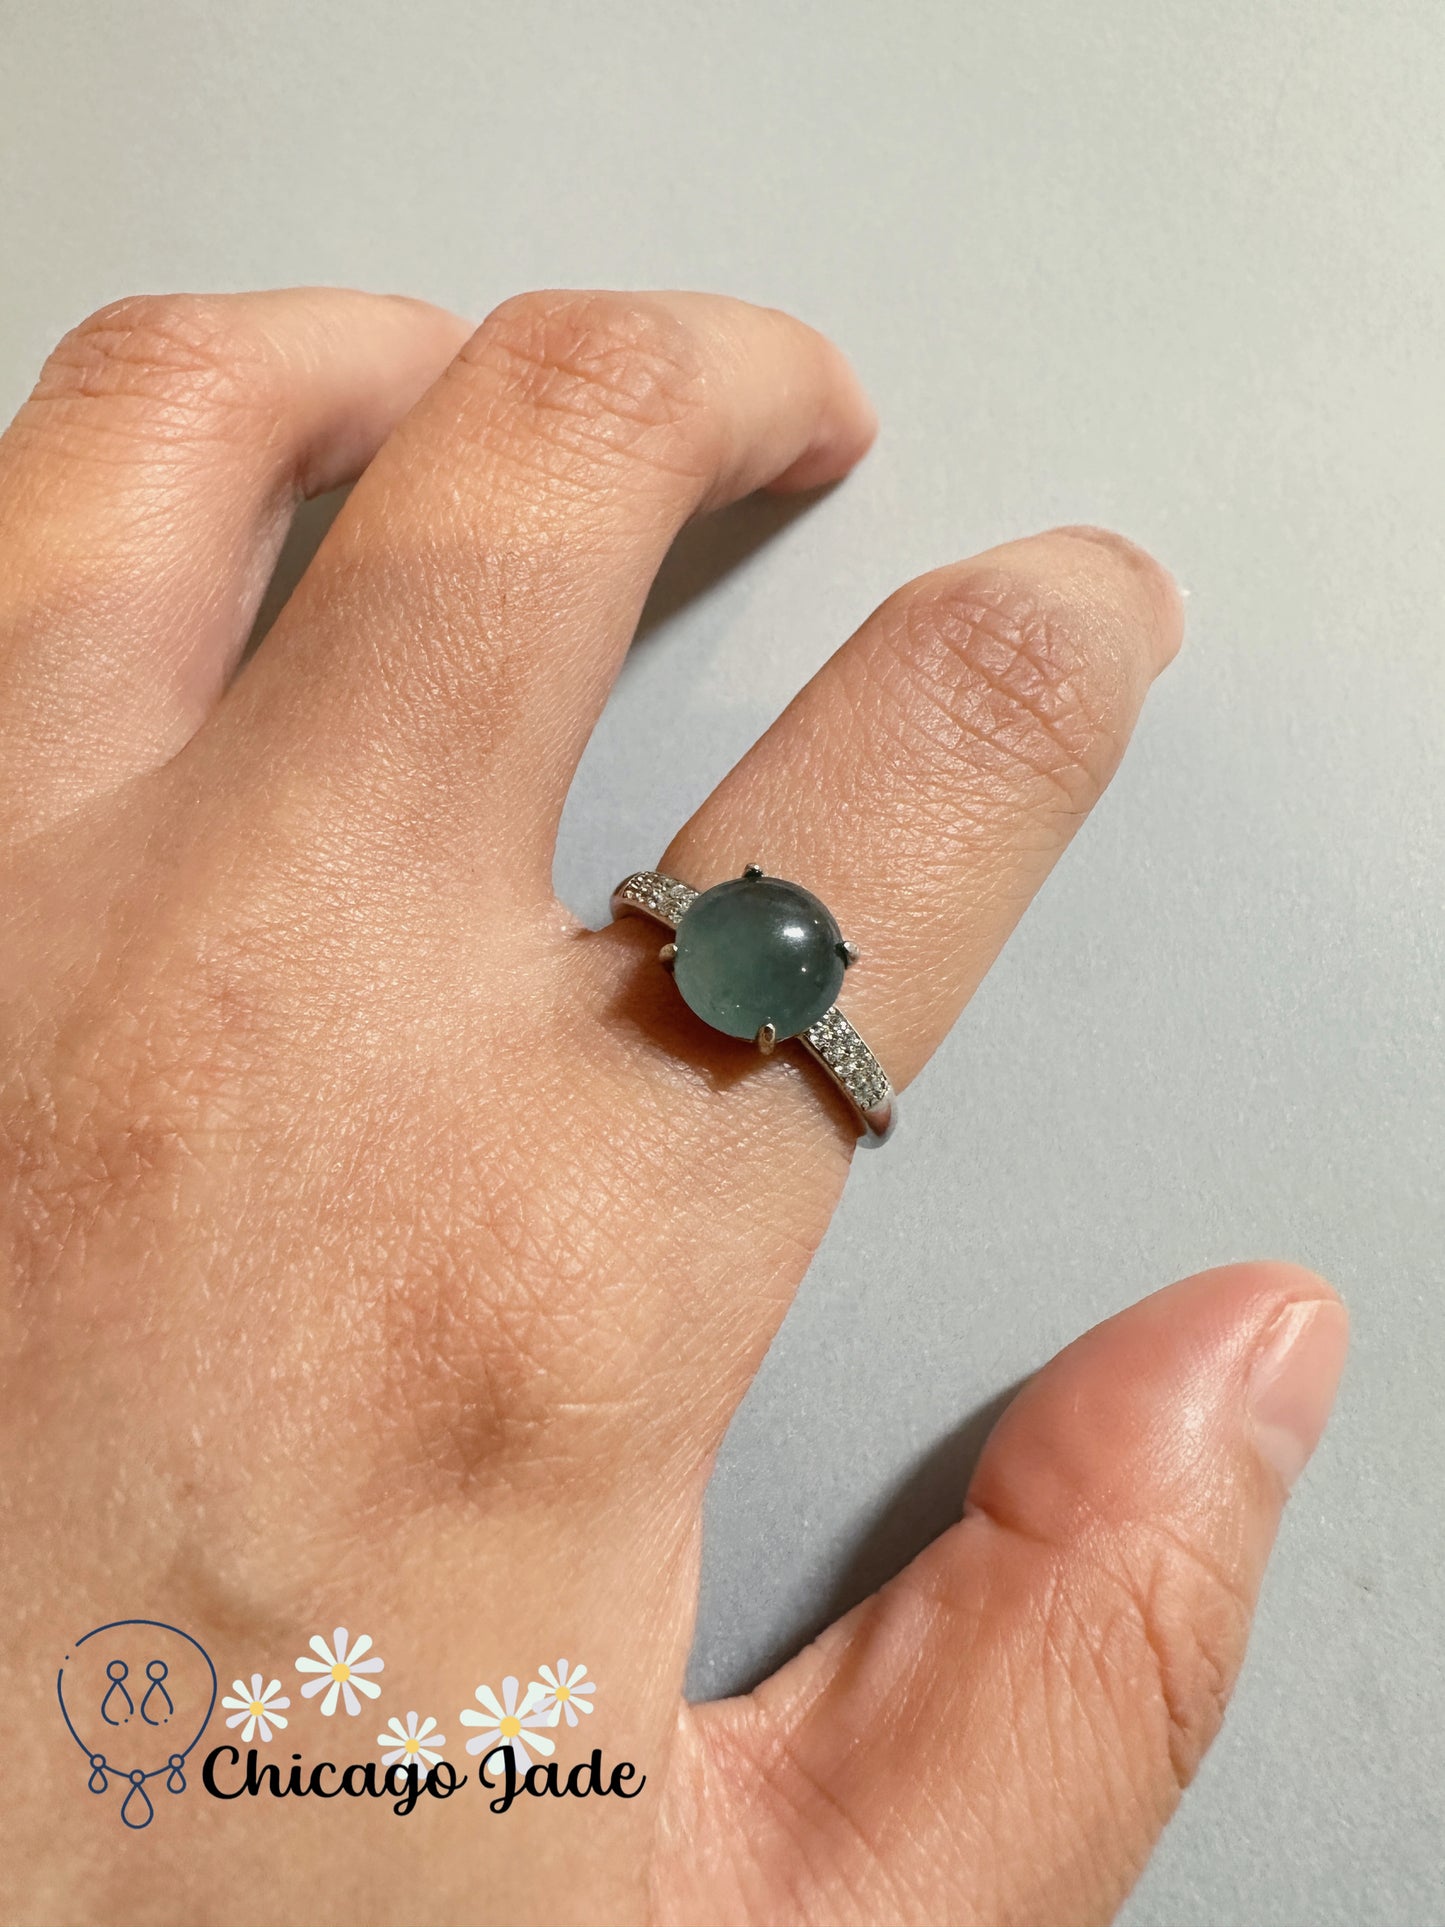 Sterling Silver Adjustable Lake Blue Jade Ring with Green Agate Earrings Set, Translucent Authentic High Quality Jadeite